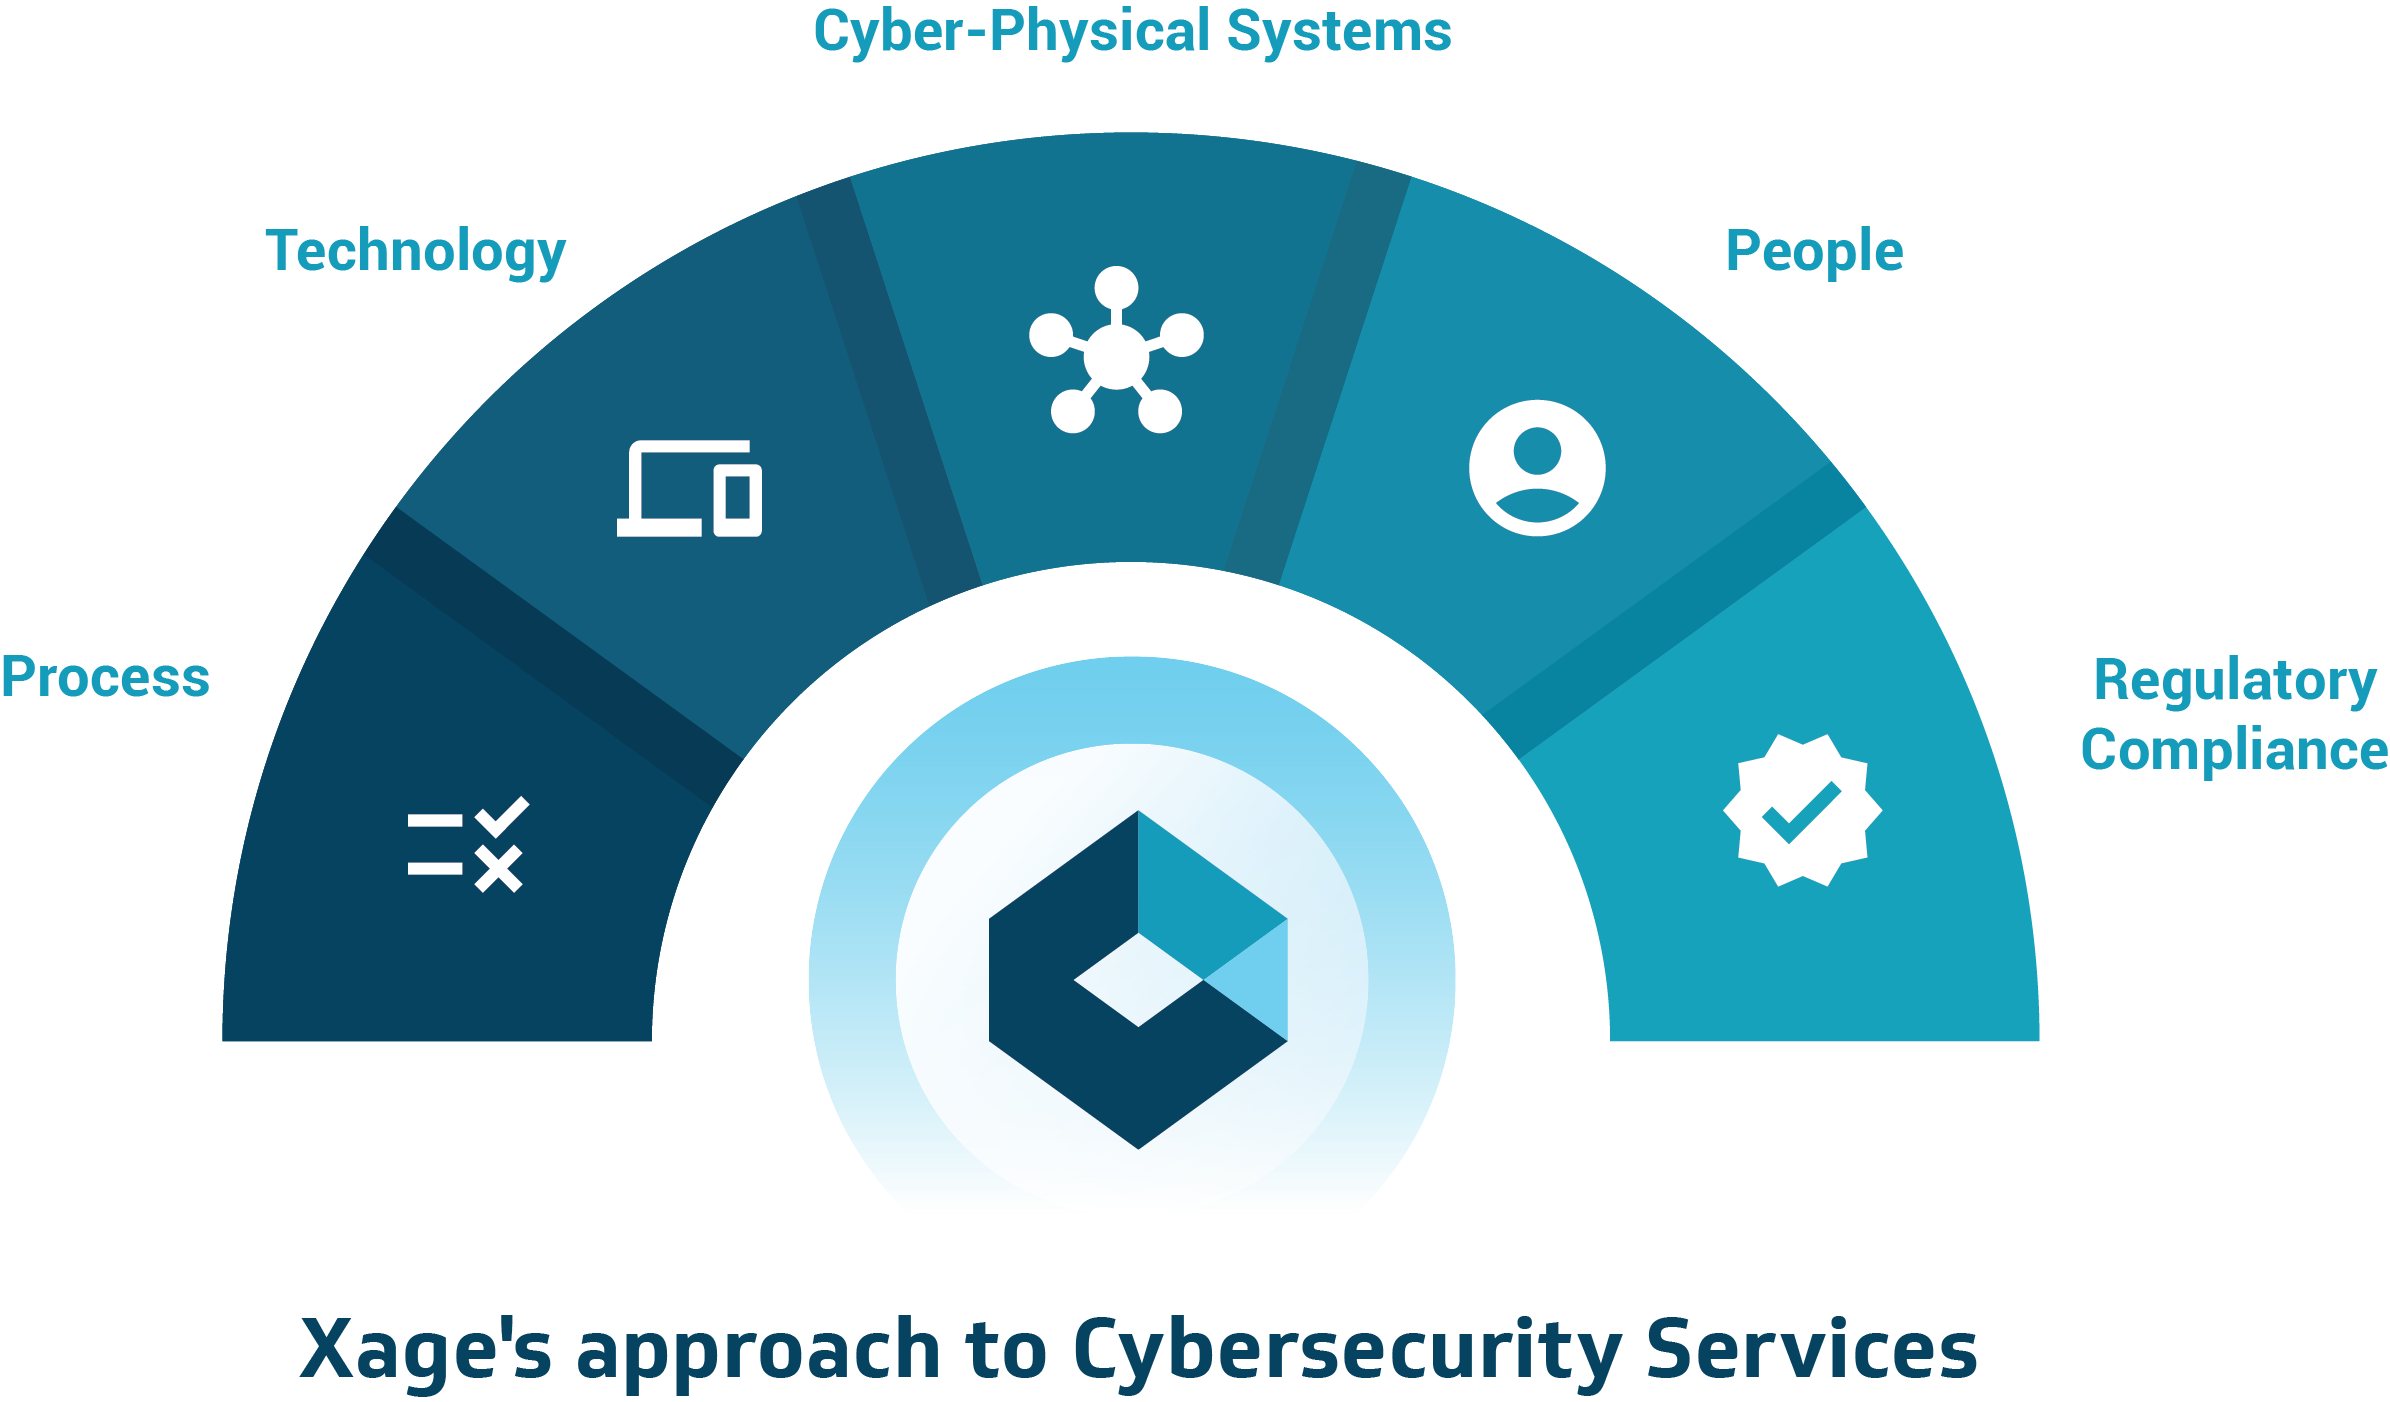 Xage's approach to Cybersecurity Services